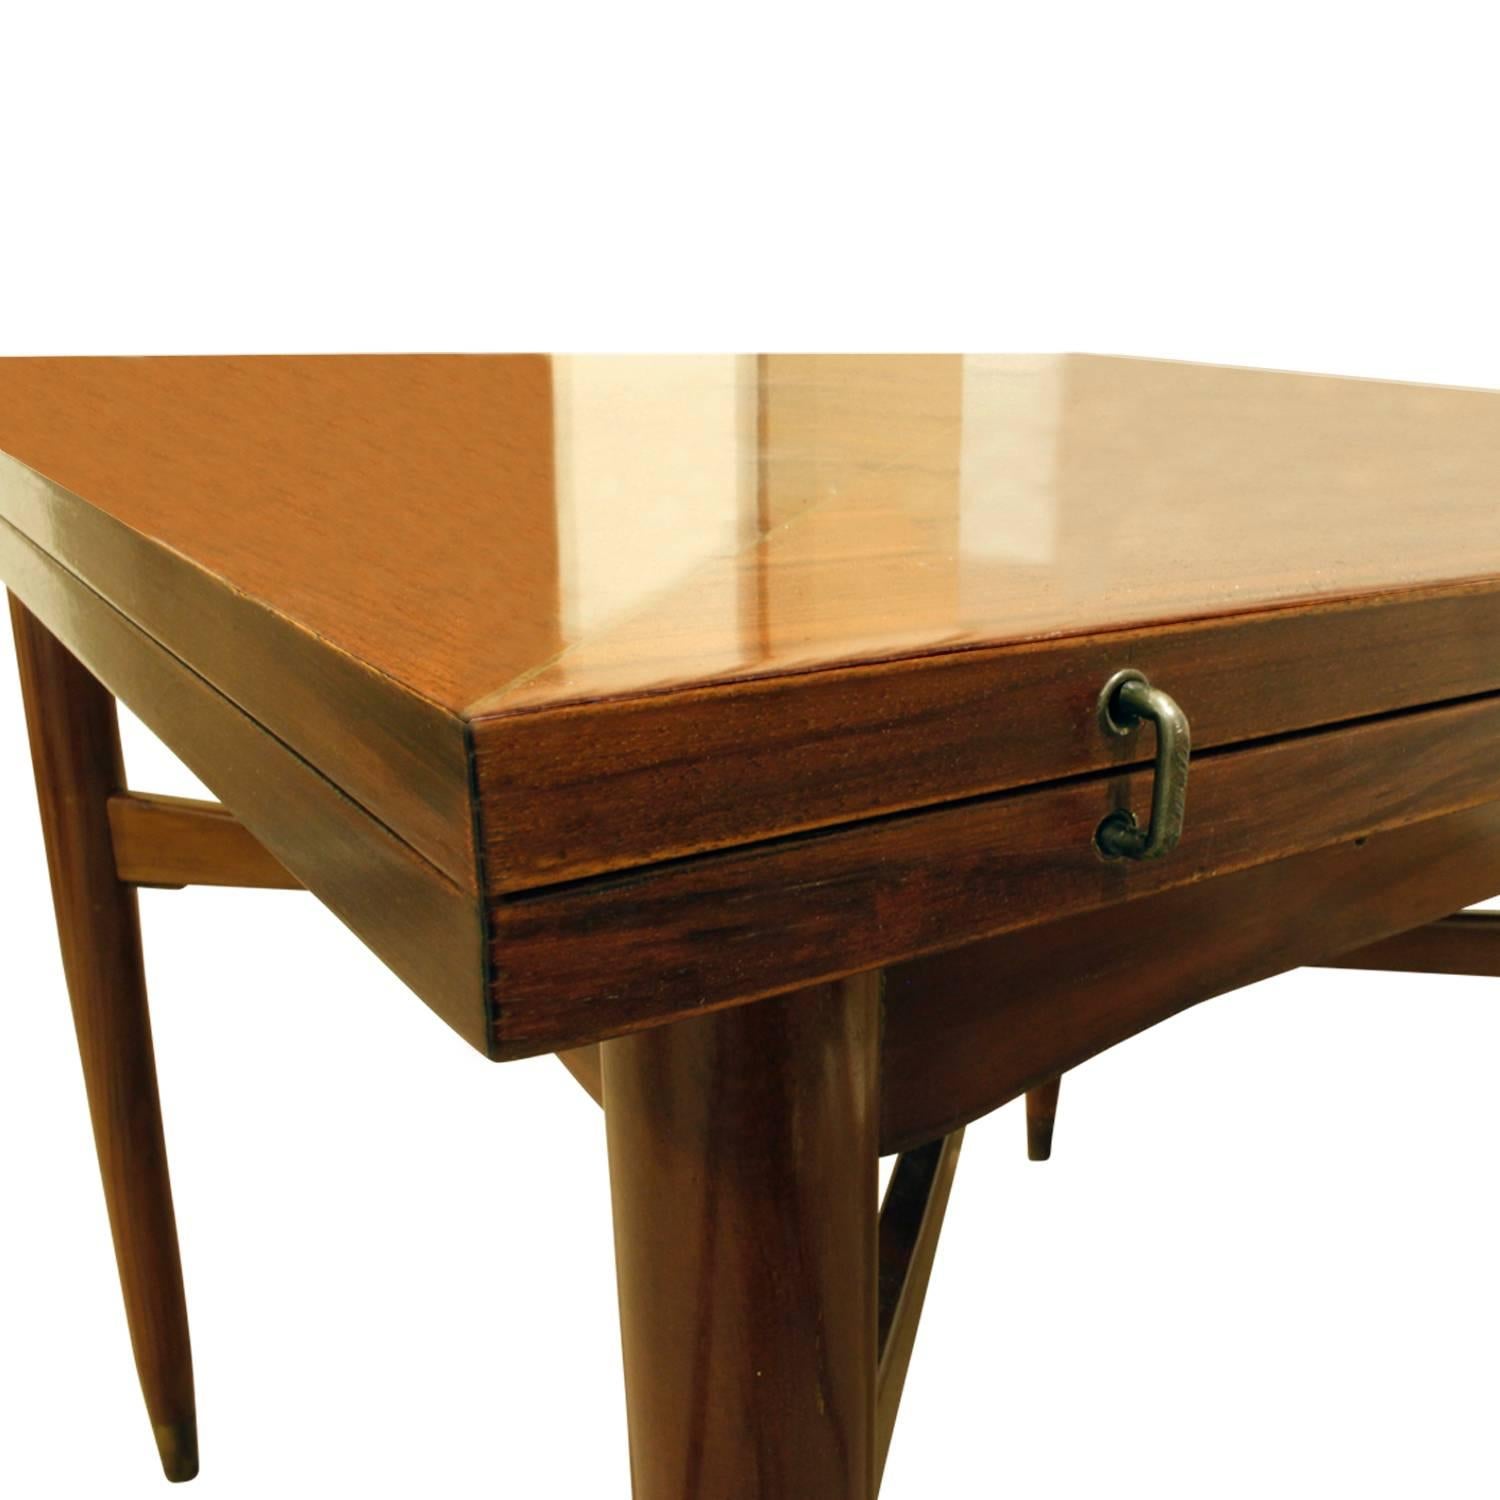 Hand-Crafted Tommi Parzinger Rare Flip-Top Game Table 1950s